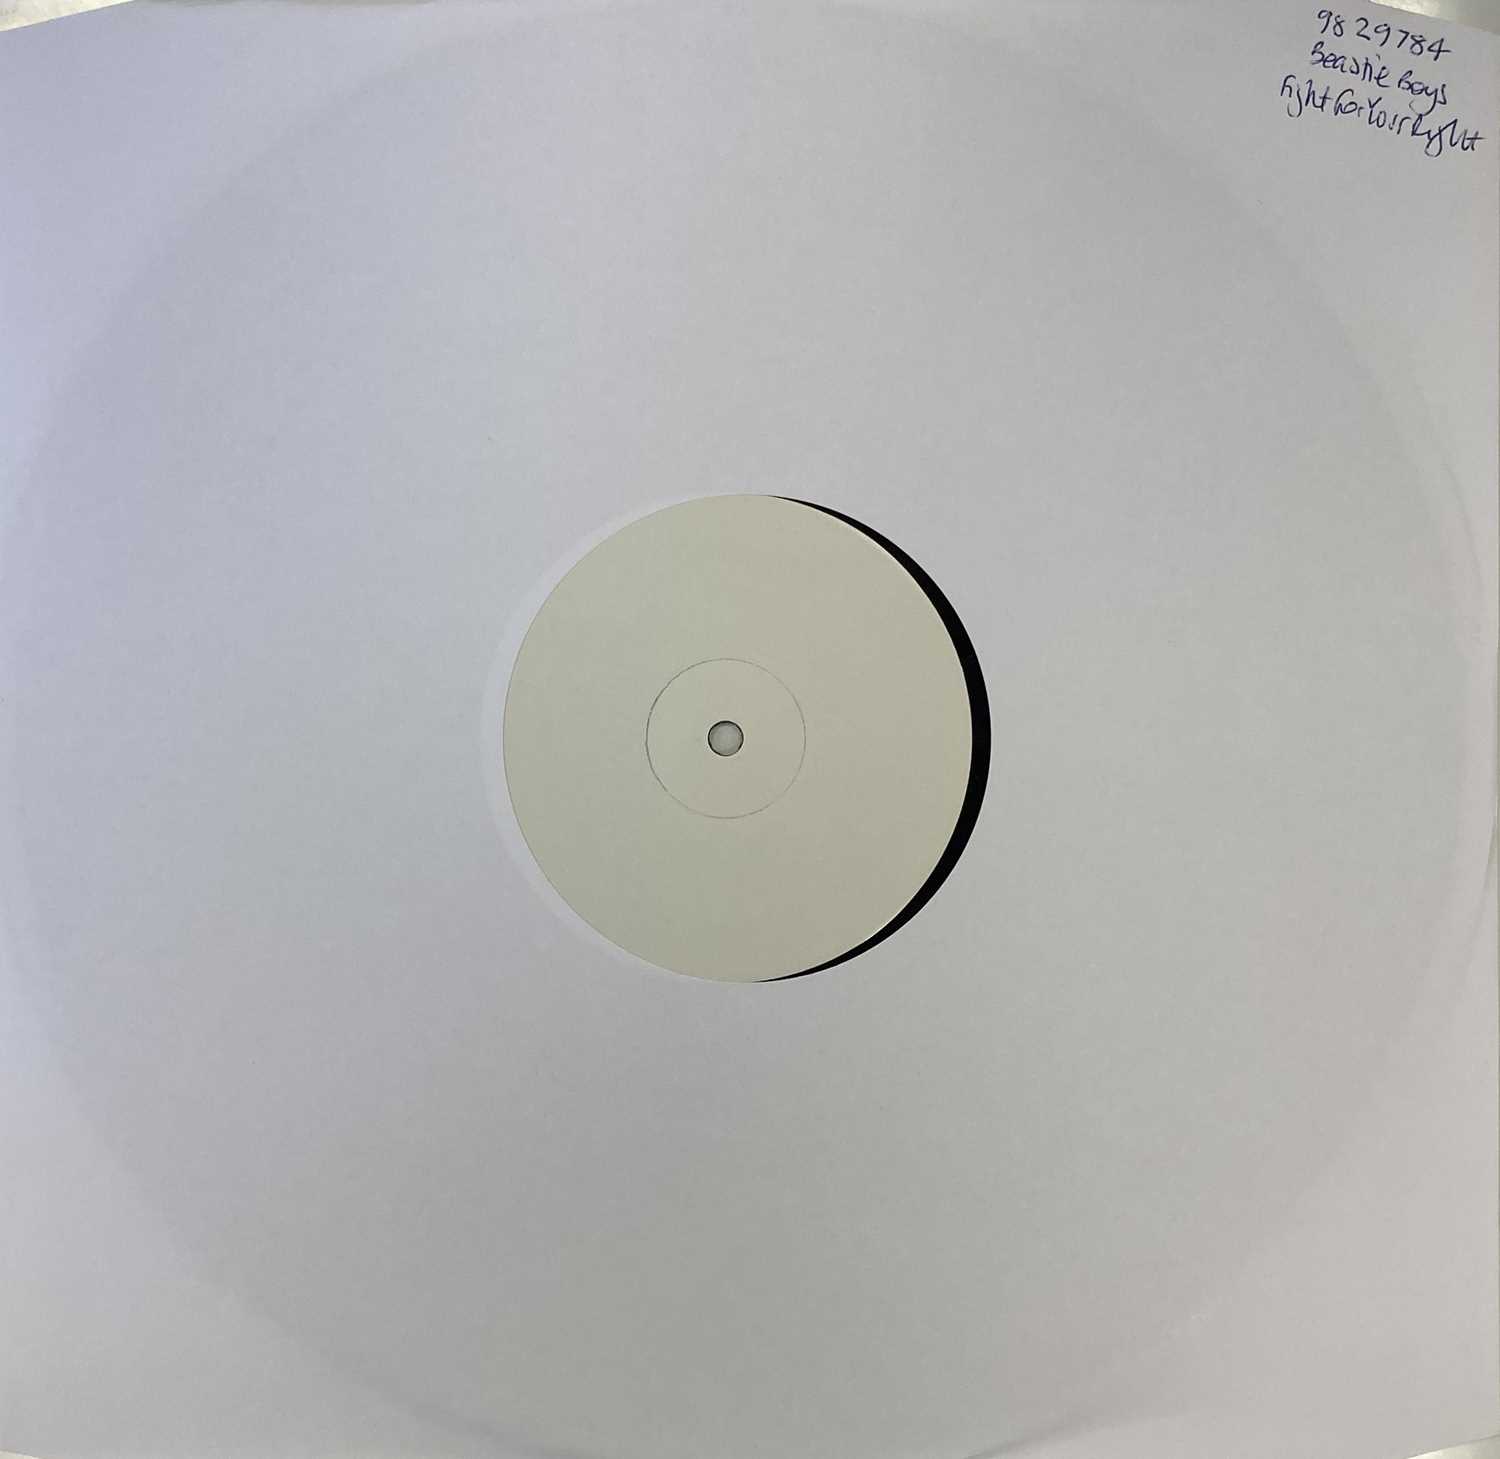 Lot 69 - BEASTIE BOYS - FIGHT FOR YOUR RIGHT 12" (2005 WHITE LABEL TEST PRESSING)